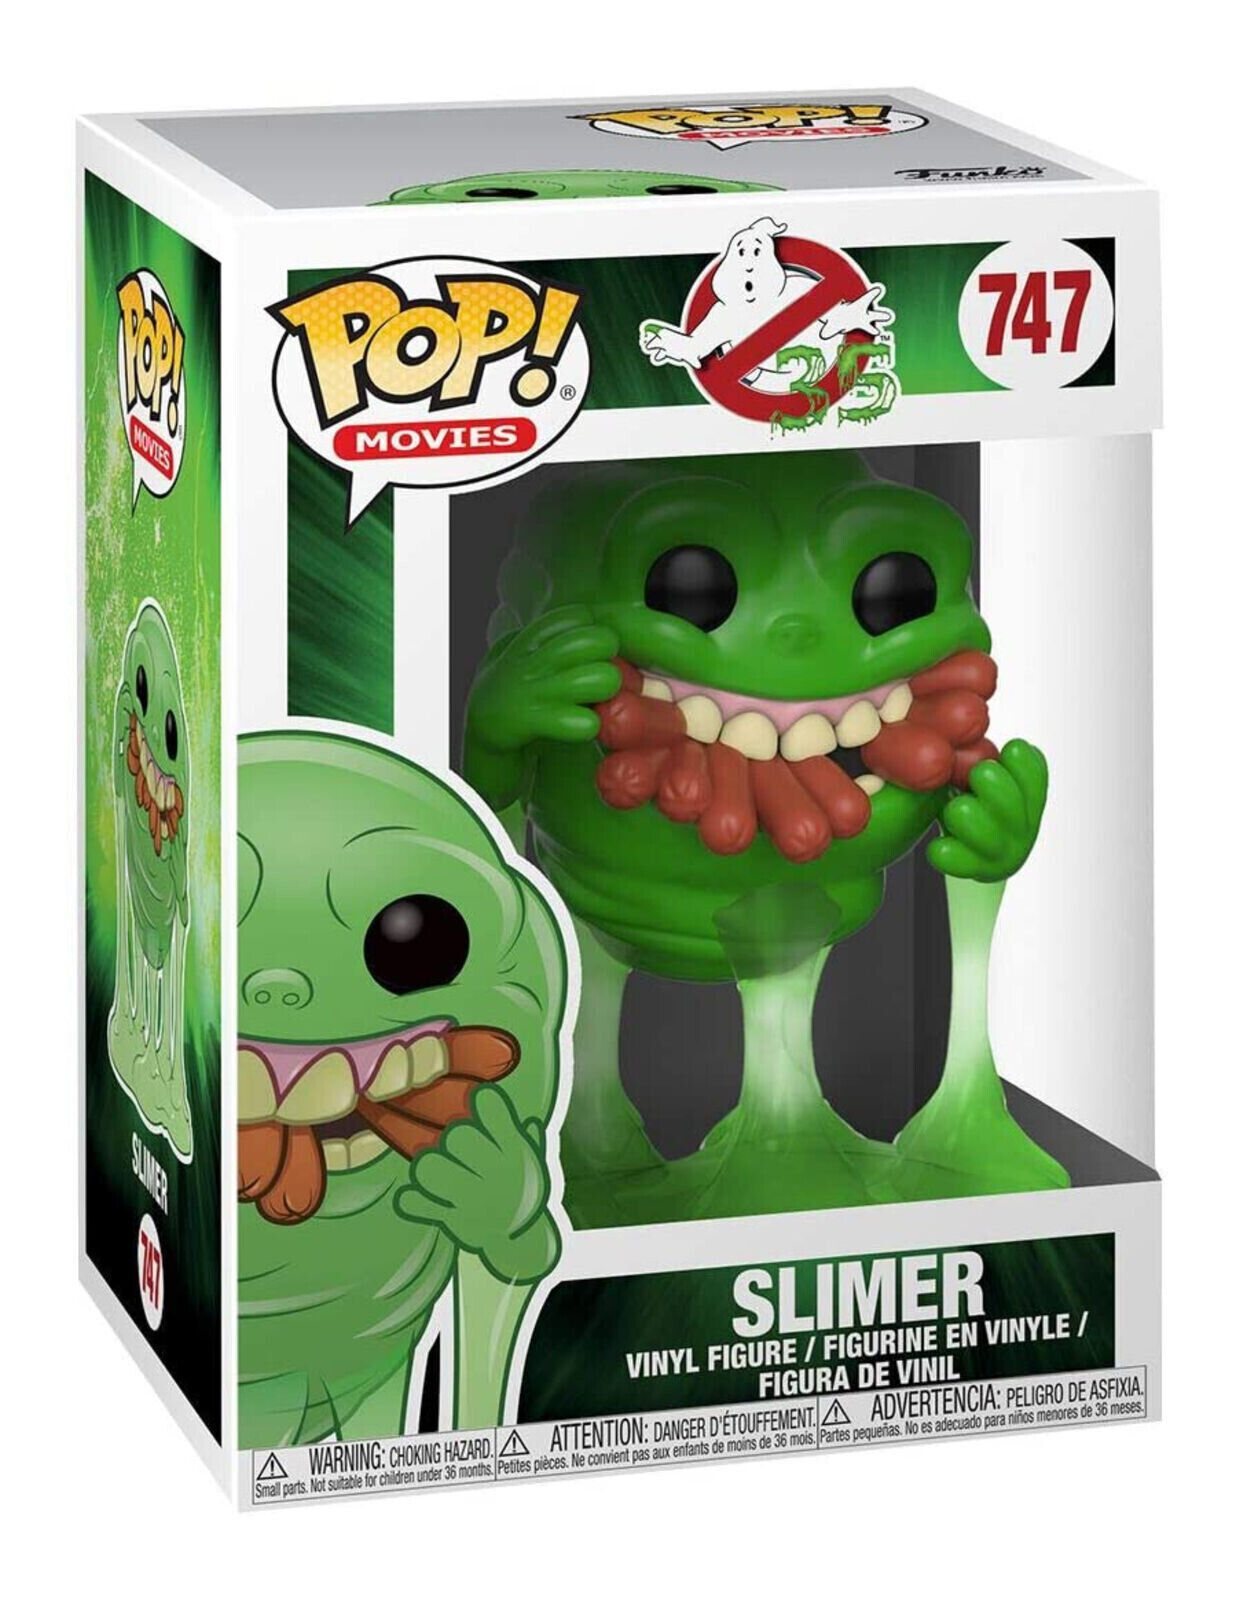 Ghostbusters Slimer with Hot Dogs Funko Pop Vinyl Figure #747